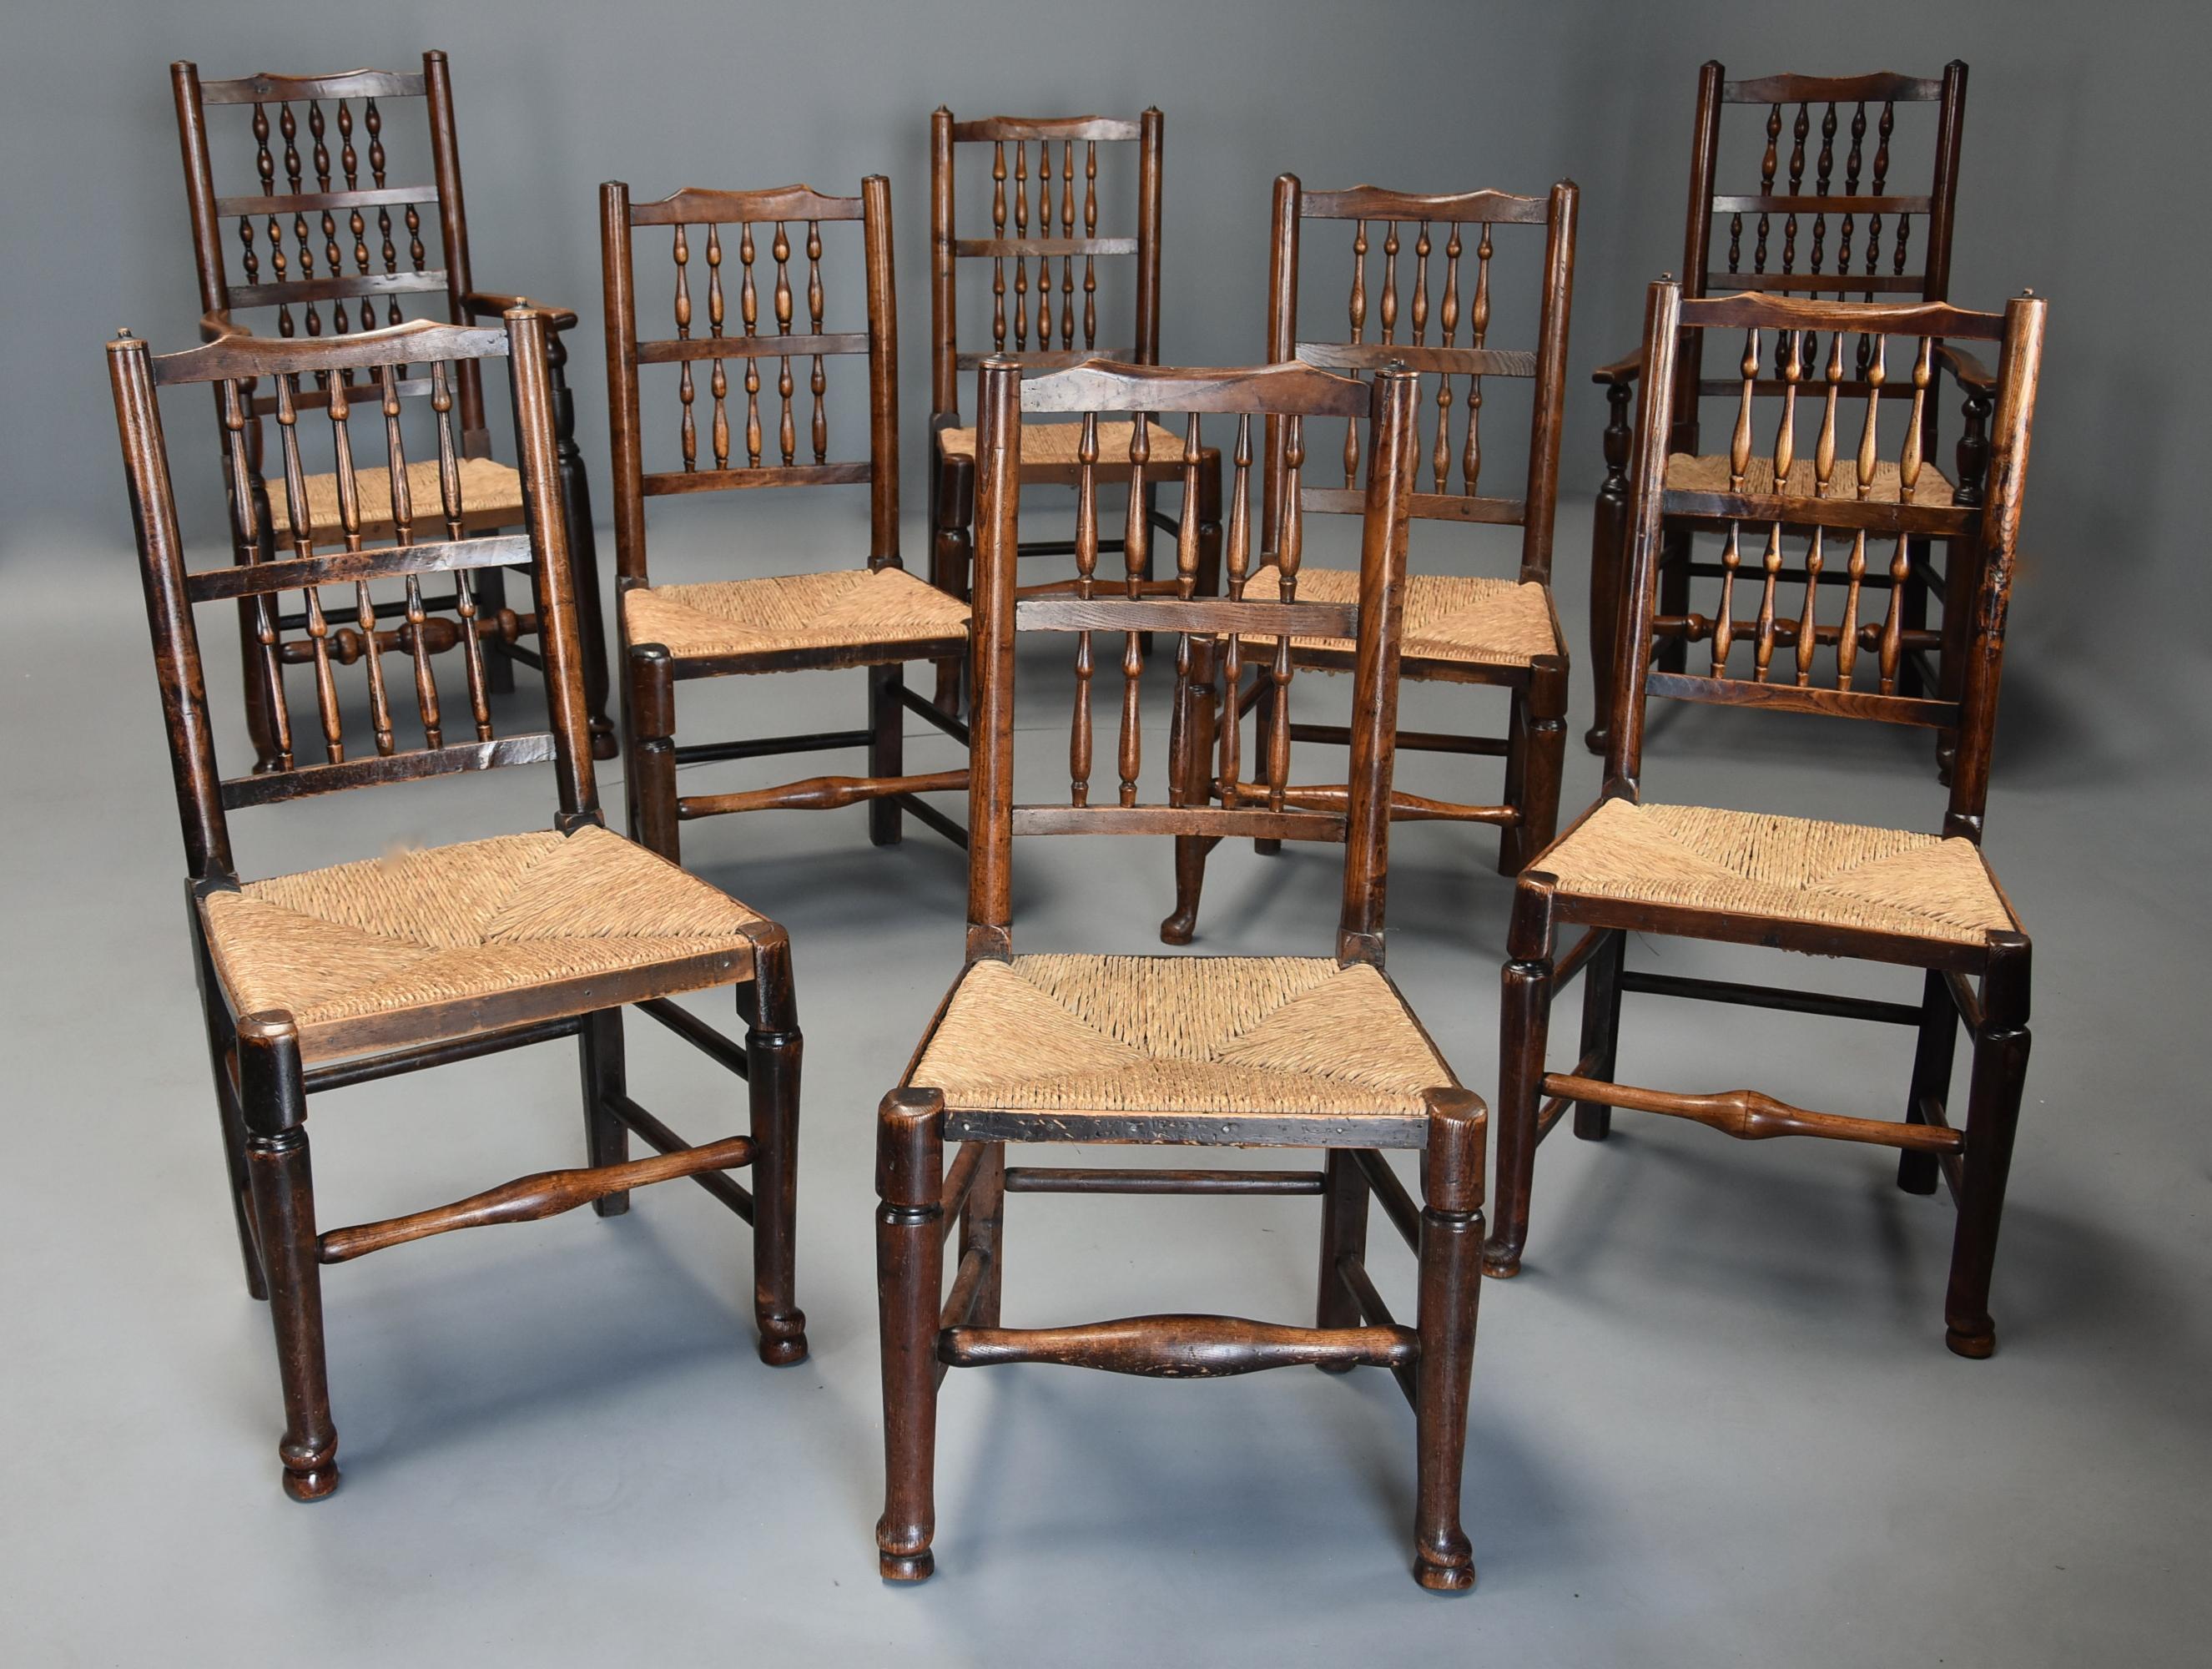 A matched set of eight mid-19th century ash spindle back chairs from the North West region of superb patina (color).

This set of chairs consist of two armchairs and six single chairs, the armchairs each with a shaped top rail with upper and lower